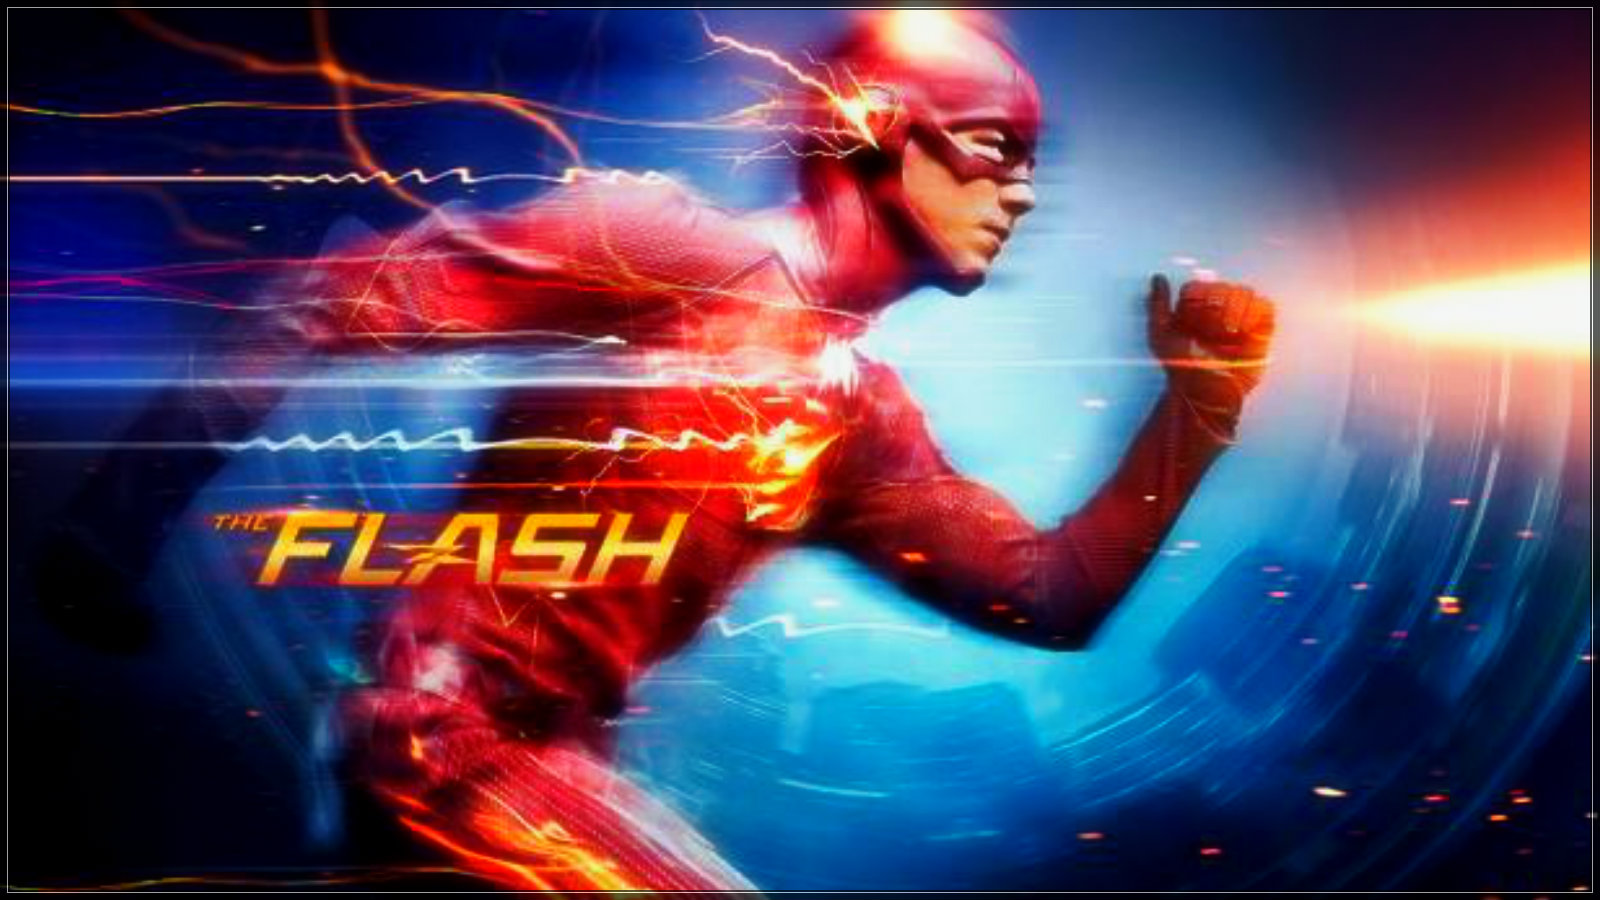 The Flash CW images The Flash HD wallpaper and background photos 1600x900